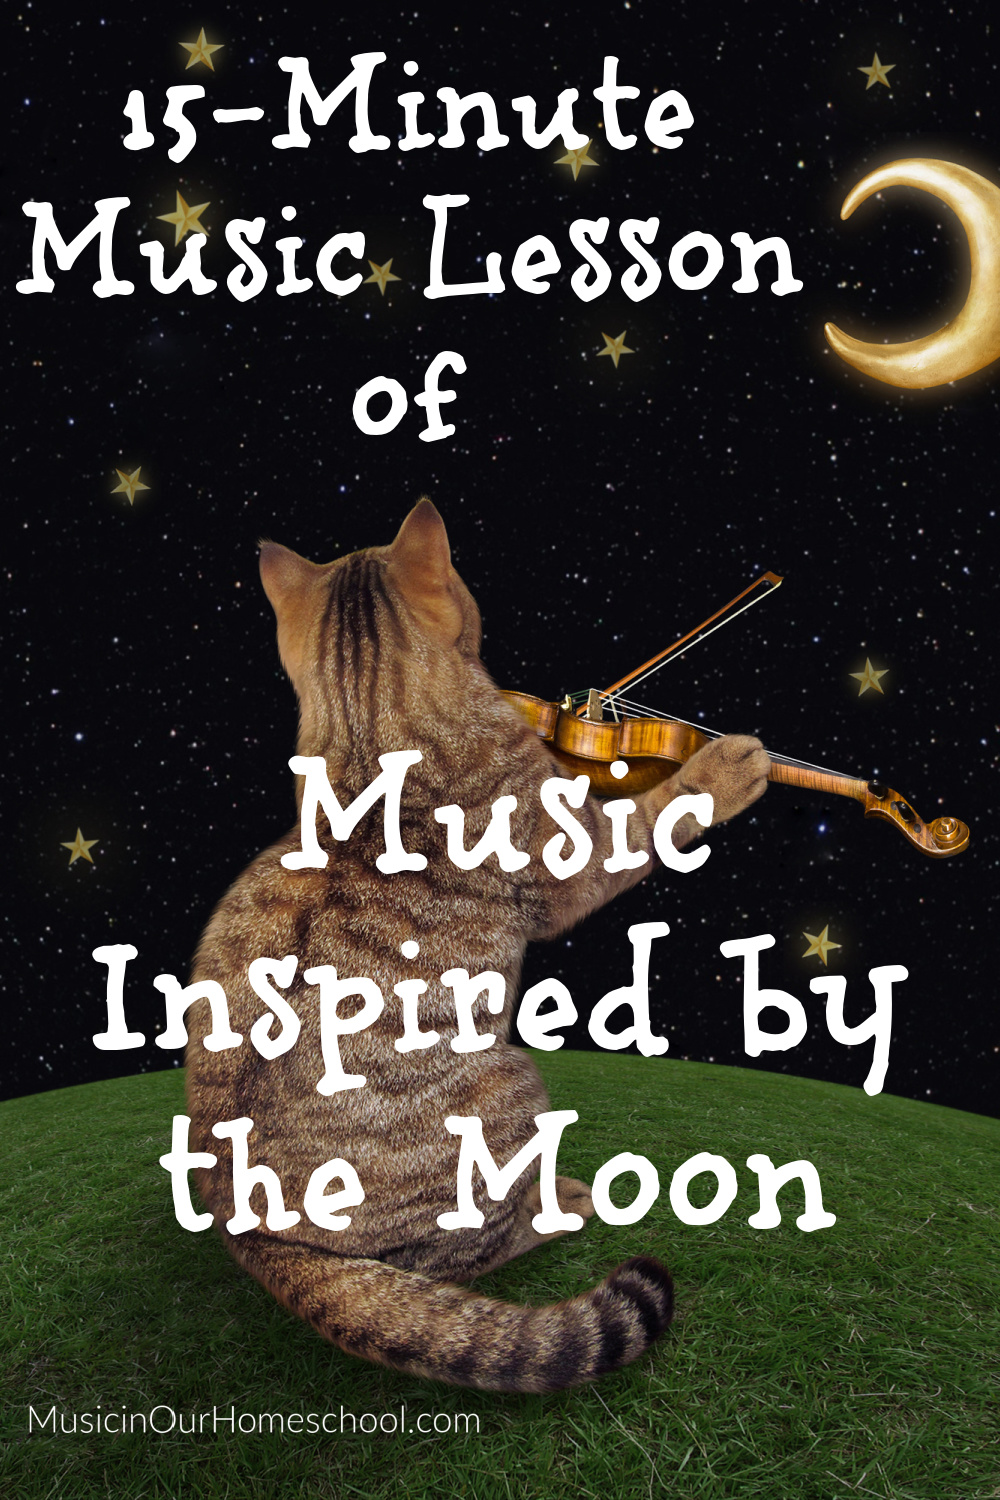 15-Minute Music Lesson of Music Inspired by the Moon